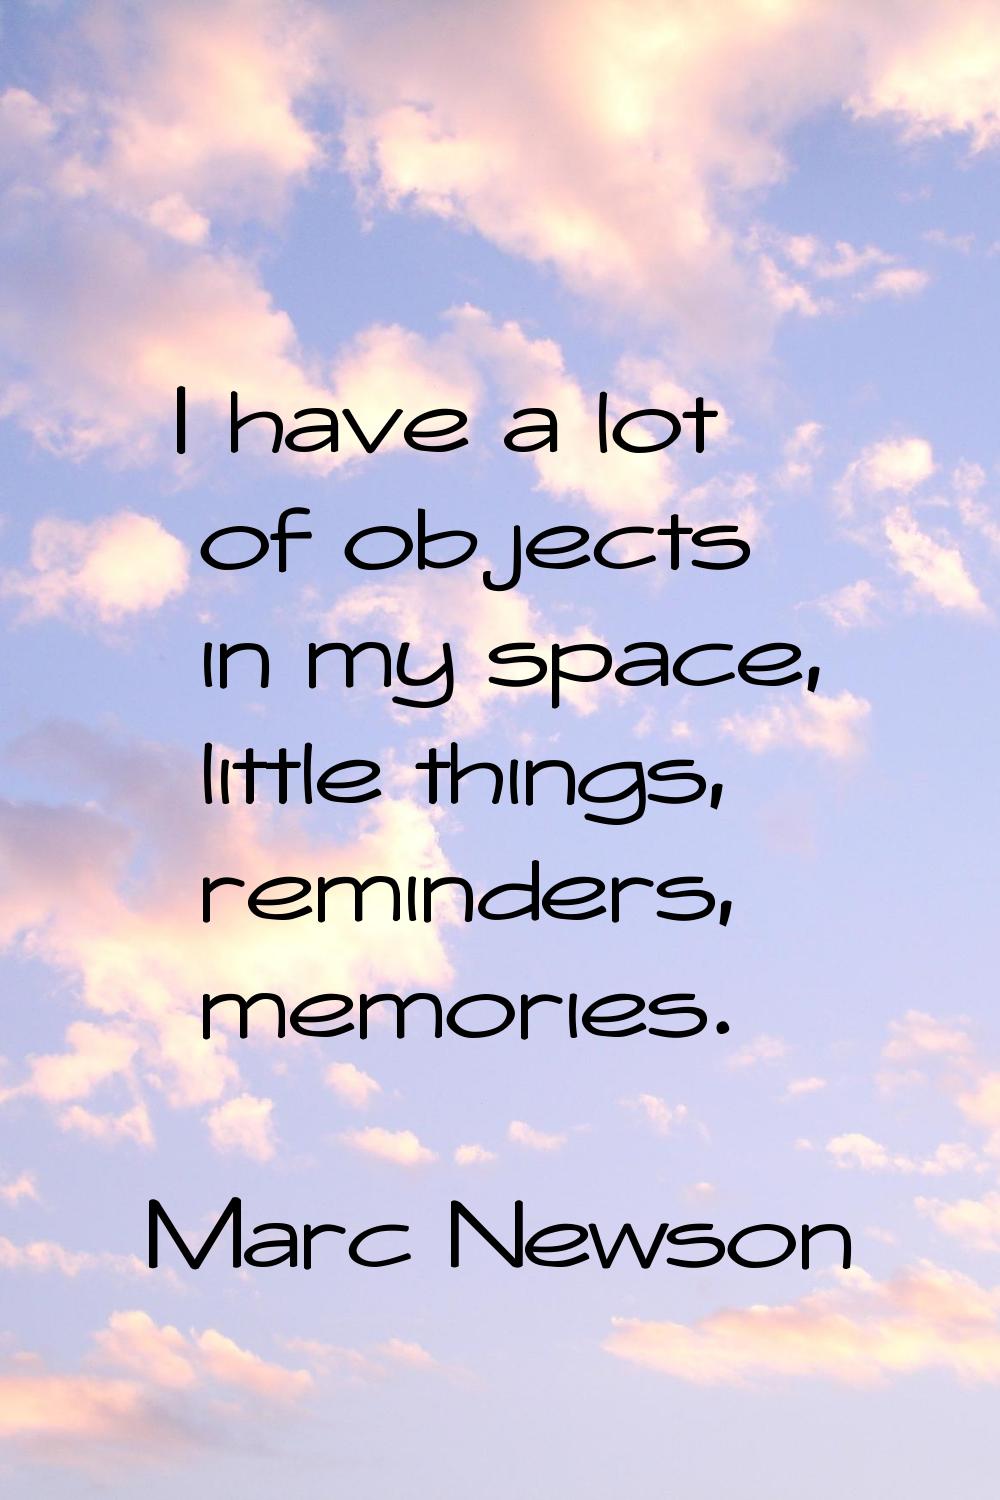 I have a lot of objects in my space, little things, reminders, memories.